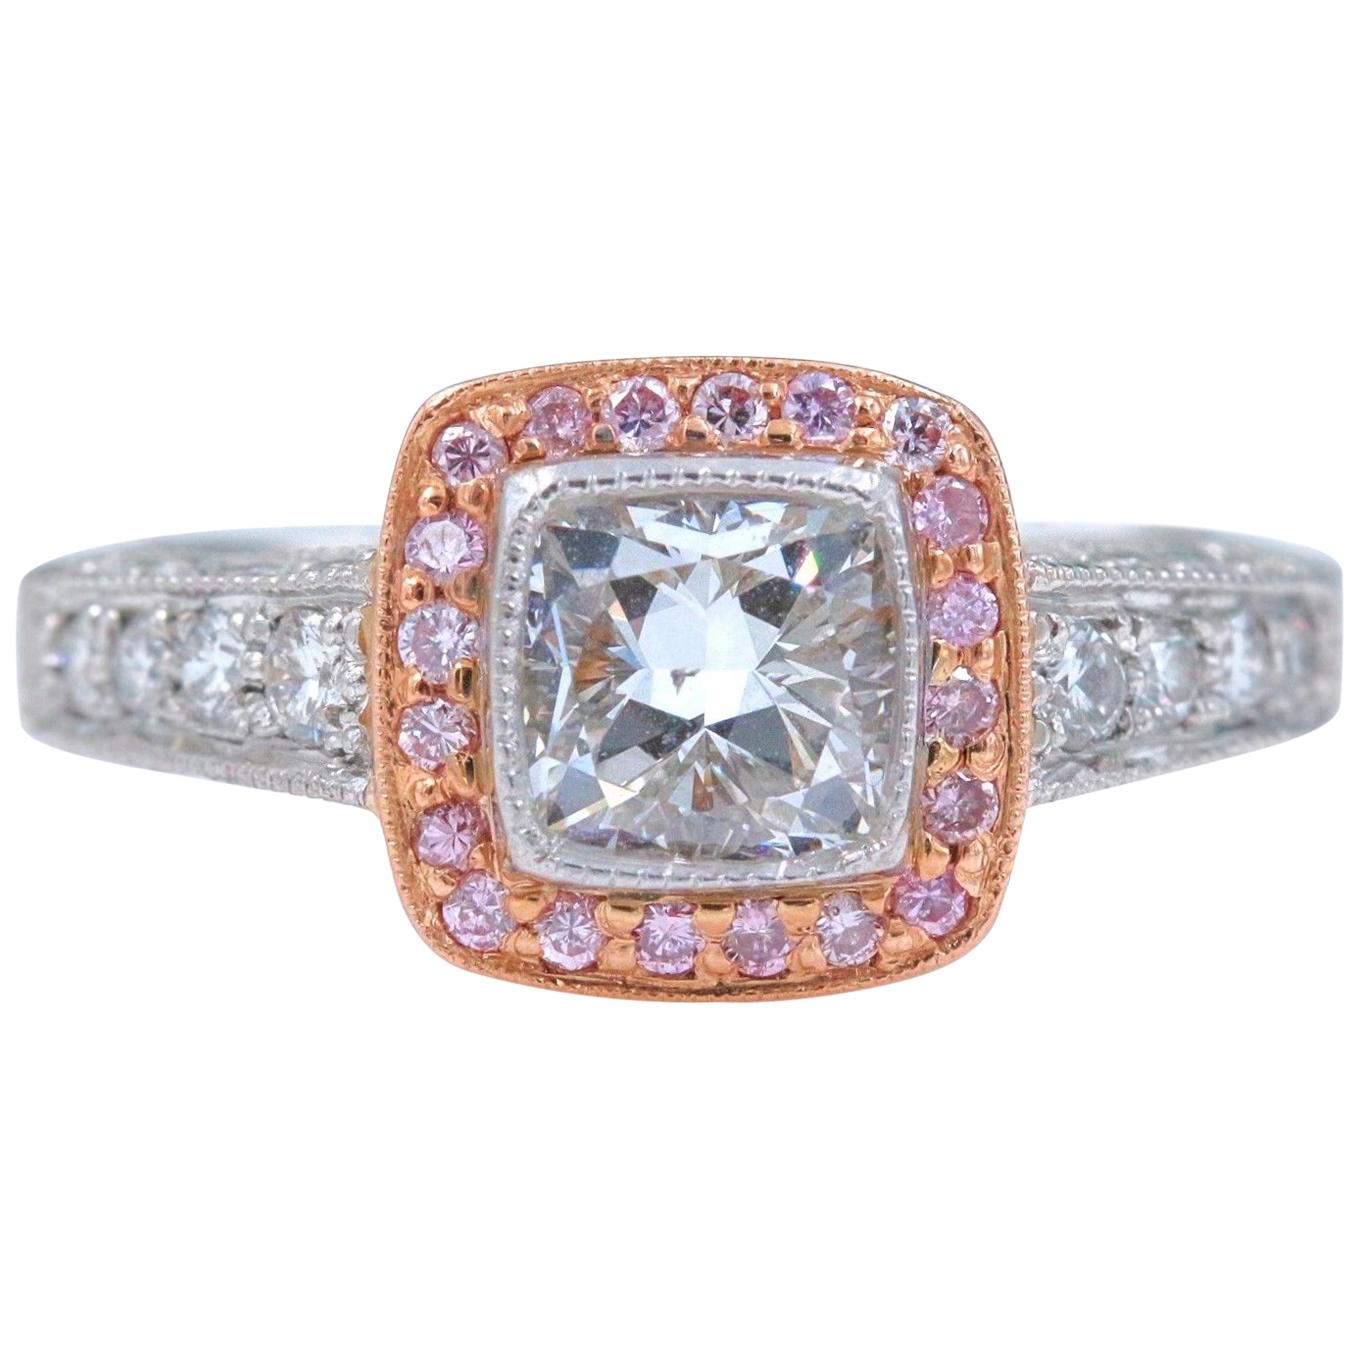 Platinum and Rose Gold Diamond Engagement Ring Cushion and Pink Diamonds